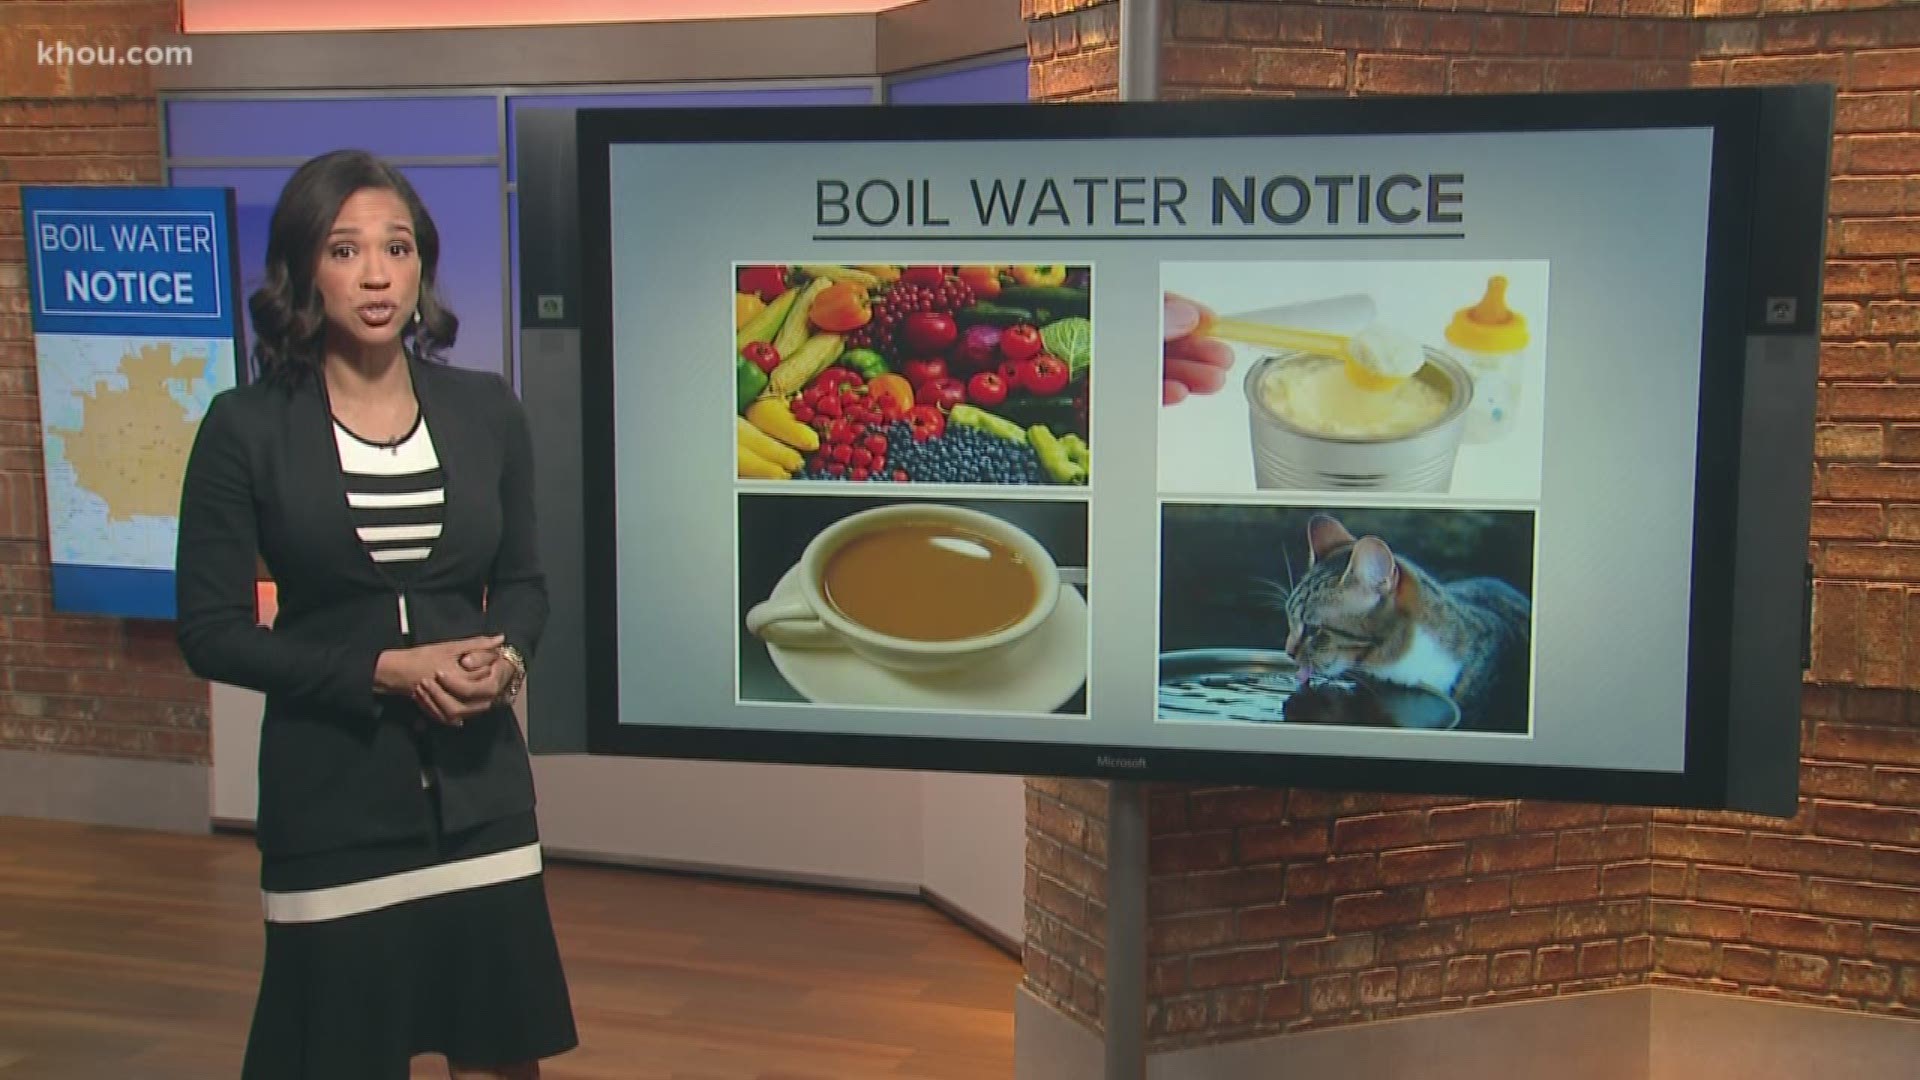 If you're under a boil water notice, here's what to know and how to use the water.